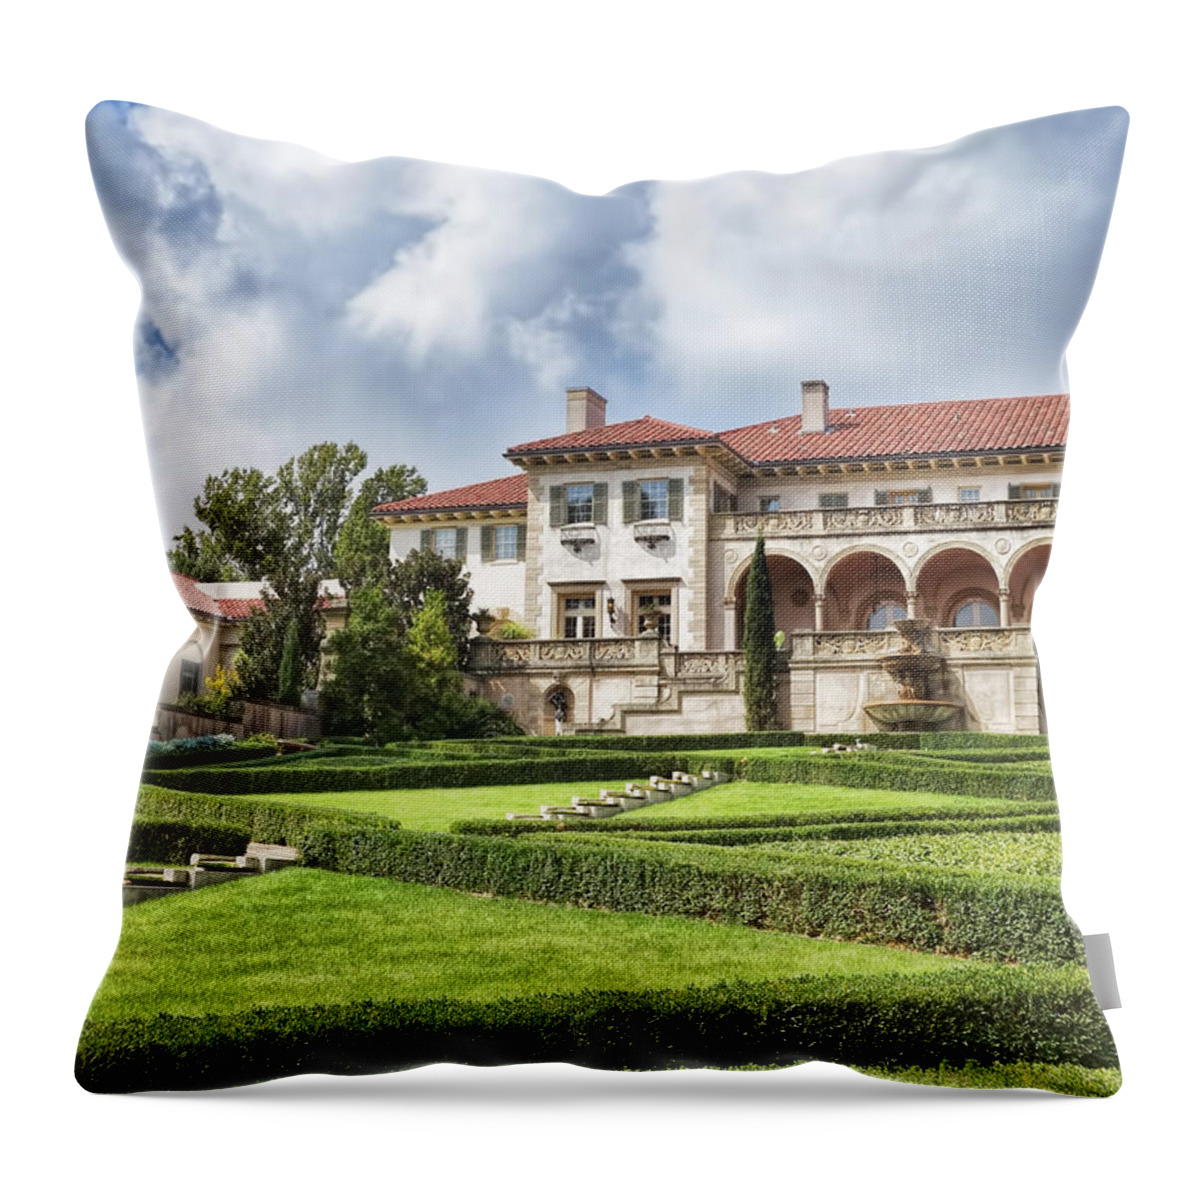 Philbrook Throw Pillow featuring the photograph Philbrook Museum Tulsa Oklahoma photograph by Ann Powell